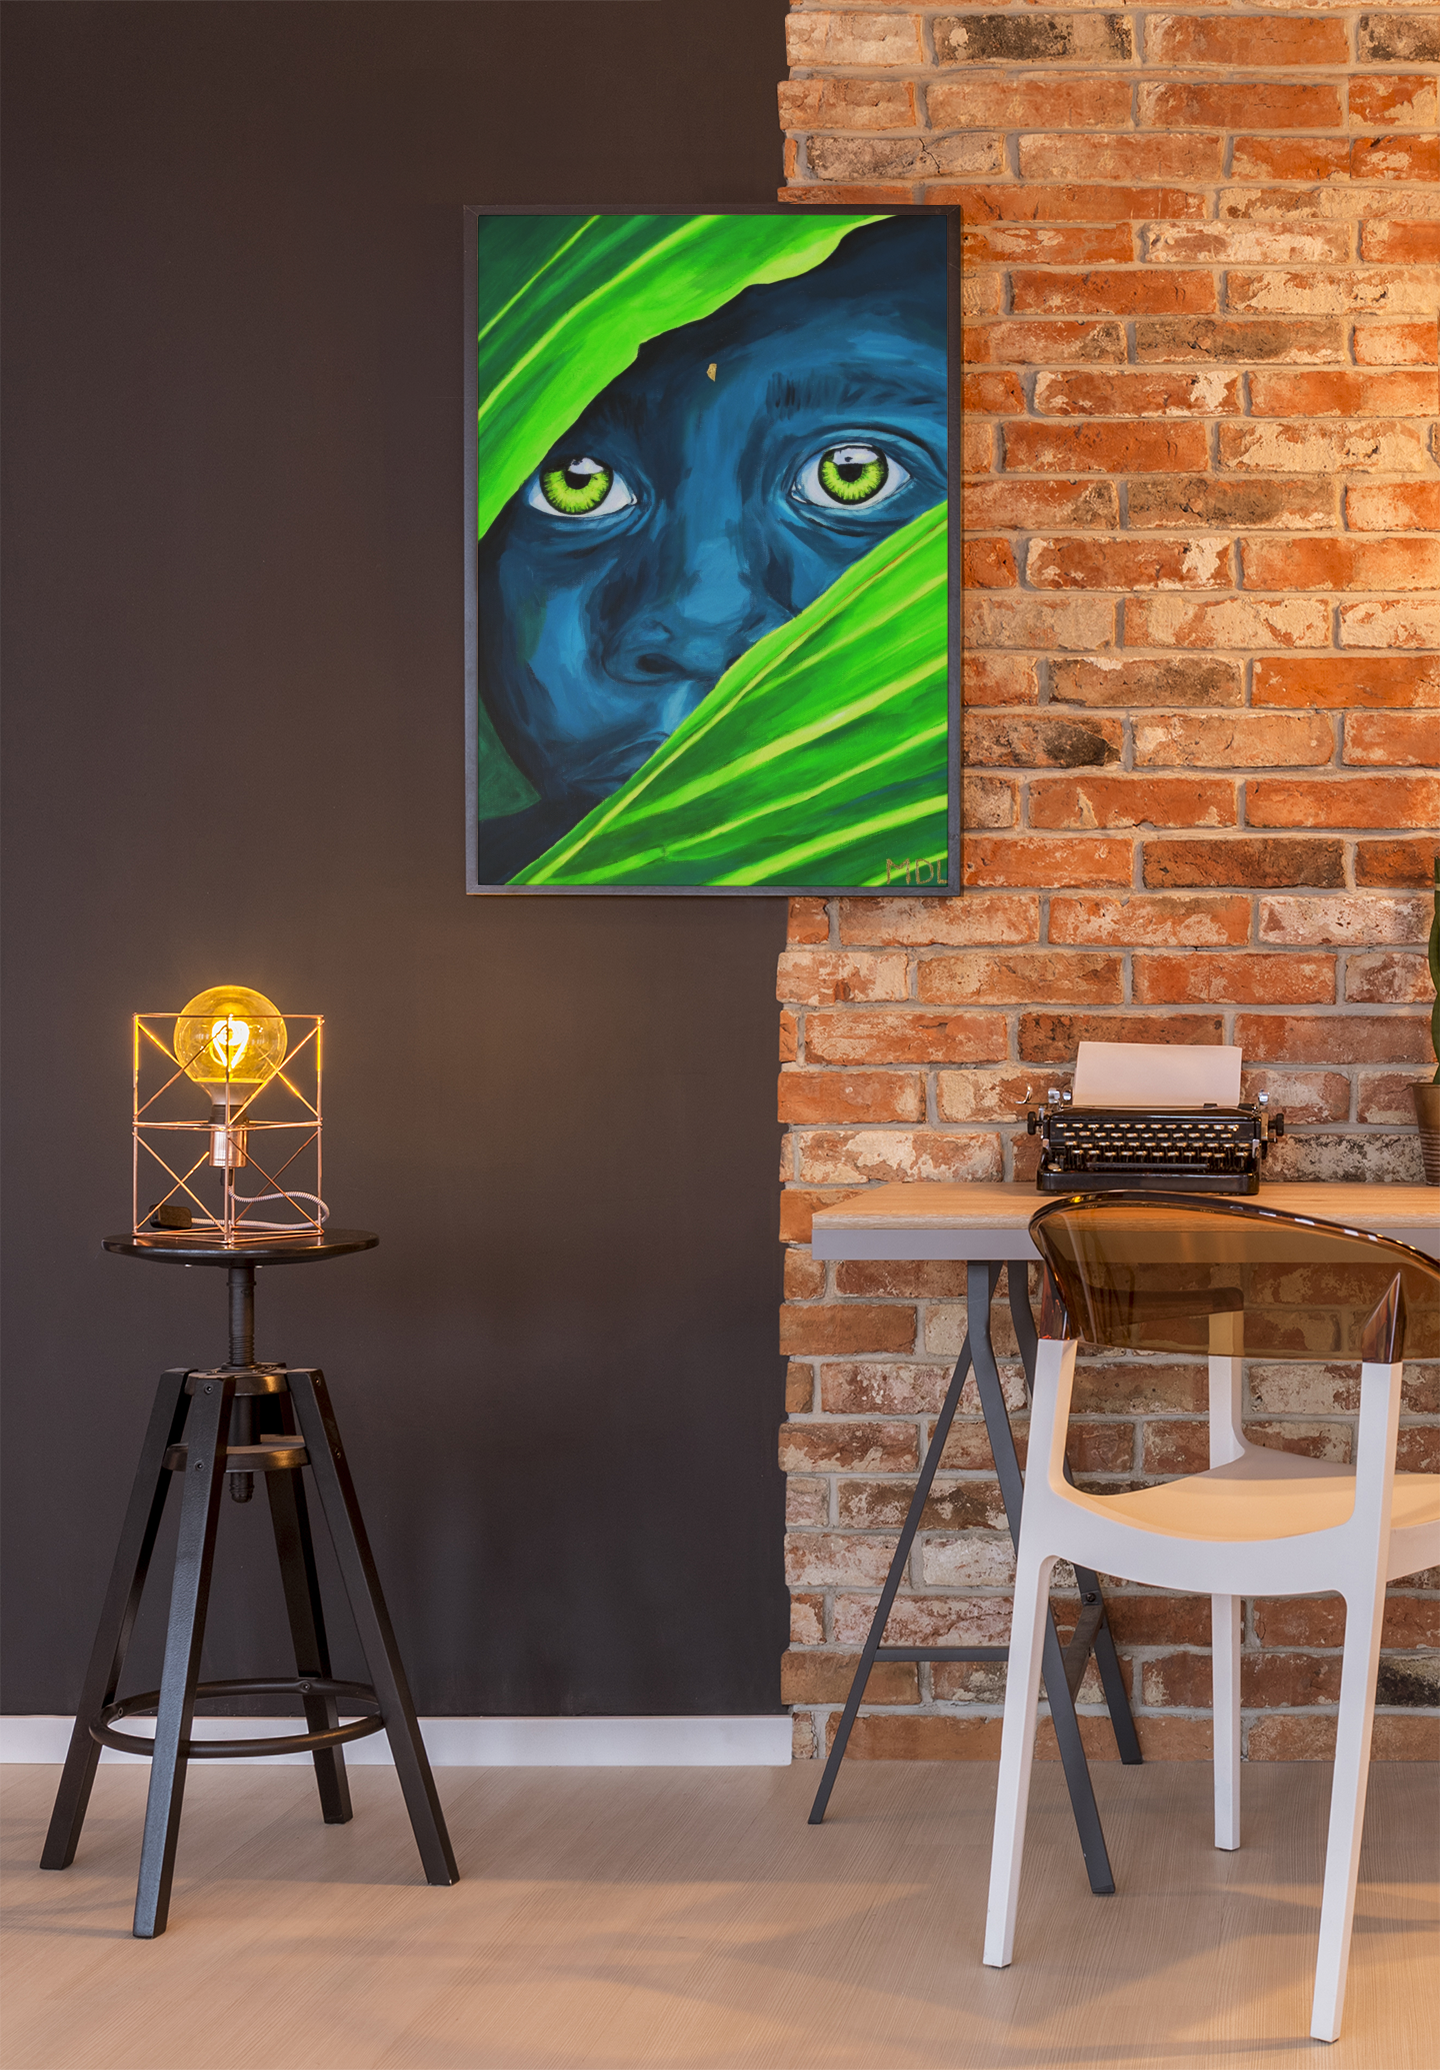 An original acrylic painting of an African Boy with wide bright eyes hiding beyond some palm leaves displayed on a brick wall in an office